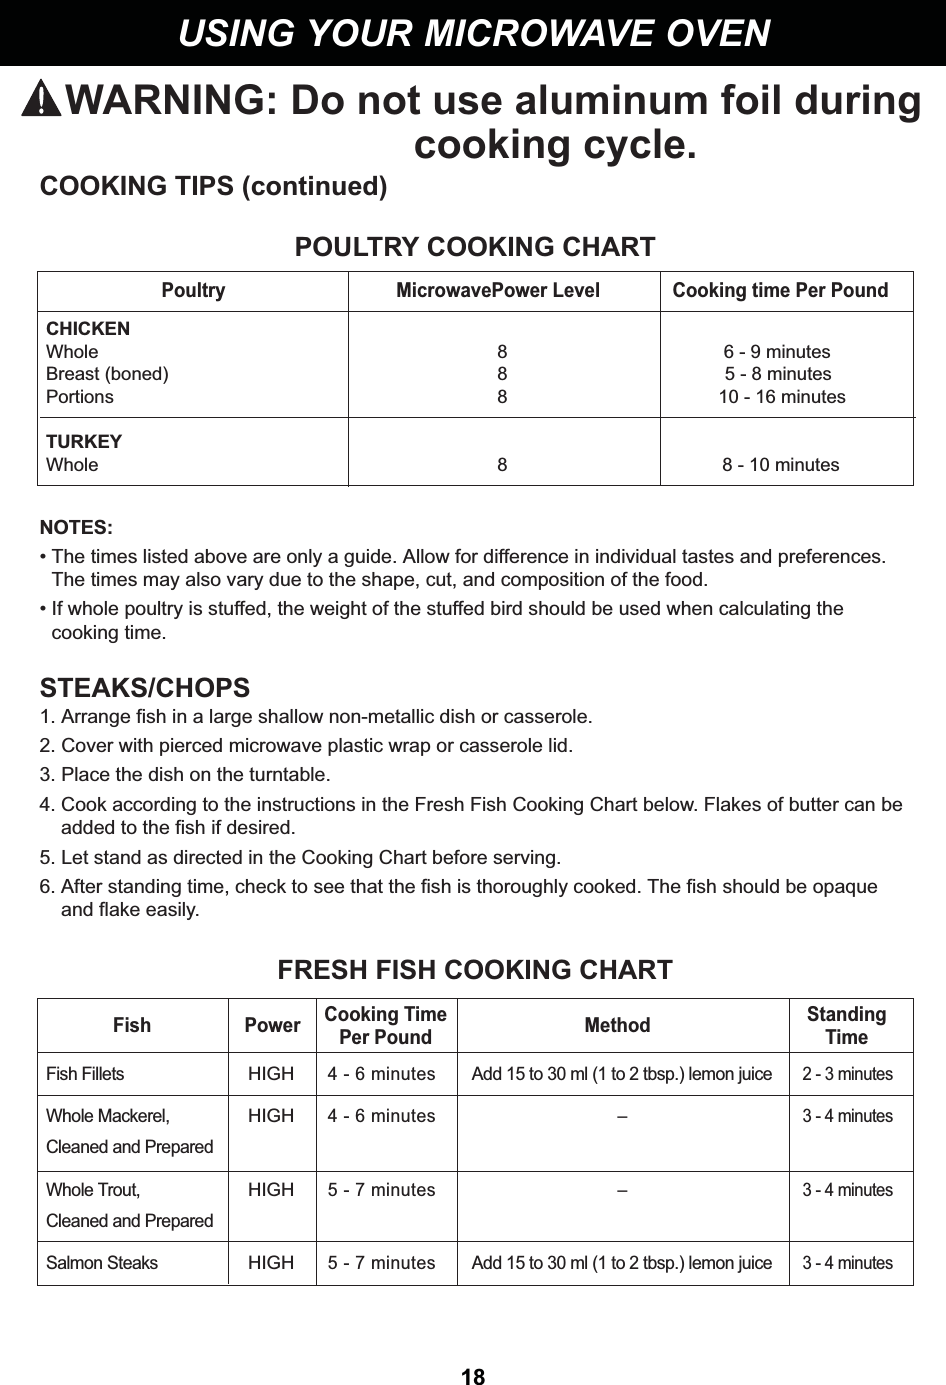 18USING YOUR MICROWAVE OVENCOOKING TIPS (continued)POULTRY COOKING CHARTNOTES:• The times listed above are only a guide. Allow for difference in individual tastes and preferences.The times may also vary due to the shape, cut, and composition of the food.• If whole poultry is stuffed, the weight of the stuffed bird should be used when calculating thecooking time.STEAKS/CHOPS1. Arrange fish in a large shallow non-metallic dish or casserole.2. Cover with pierced microwave plastic wrap or casserole lid.3. Place the dish on the turntable.4. Cook according to the instructions in the Fresh Fish Cooking Chart below. Flakes of butter can beadded to the fish if desired.5. Let stand as directed in the Cooking Chart before serving.6. After standing time, check to see that the fish is thoroughly cooked. The fish should be opaqueand flake easily.FRESH FISH COOKING CHARTFish Power Cooking Time Method StandingPer Pound TimeFish FilletsWhole Mackerel,Cleaned and PreparedWhole Trout,Cleaned and PreparedSalmon SteaksHIGHHIGHHIGHHIGH4 - 6 minutes4 - 6 minutes5 - 7 minutes5 - 7 minutesAdd 15 to 30 ml (1 to 2 tbsp.) lemon juice––Add 15 to 30 ml (1 to 2 tbsp.) lemon juice2 - 3 minutes3 - 4 minutes3 - 4 minutes3 - 4 minutesPoultry                                  MicrowavePower Level               Cooking time Per PoundCHICKENWholeBreast (boned)PortionsTURKEYWhole88886 - 9 minutes5 - 8 minutes10 - 16 minutes8 - 10 minutesWARNING: Do not use aluminum foil duringcooking cycle.